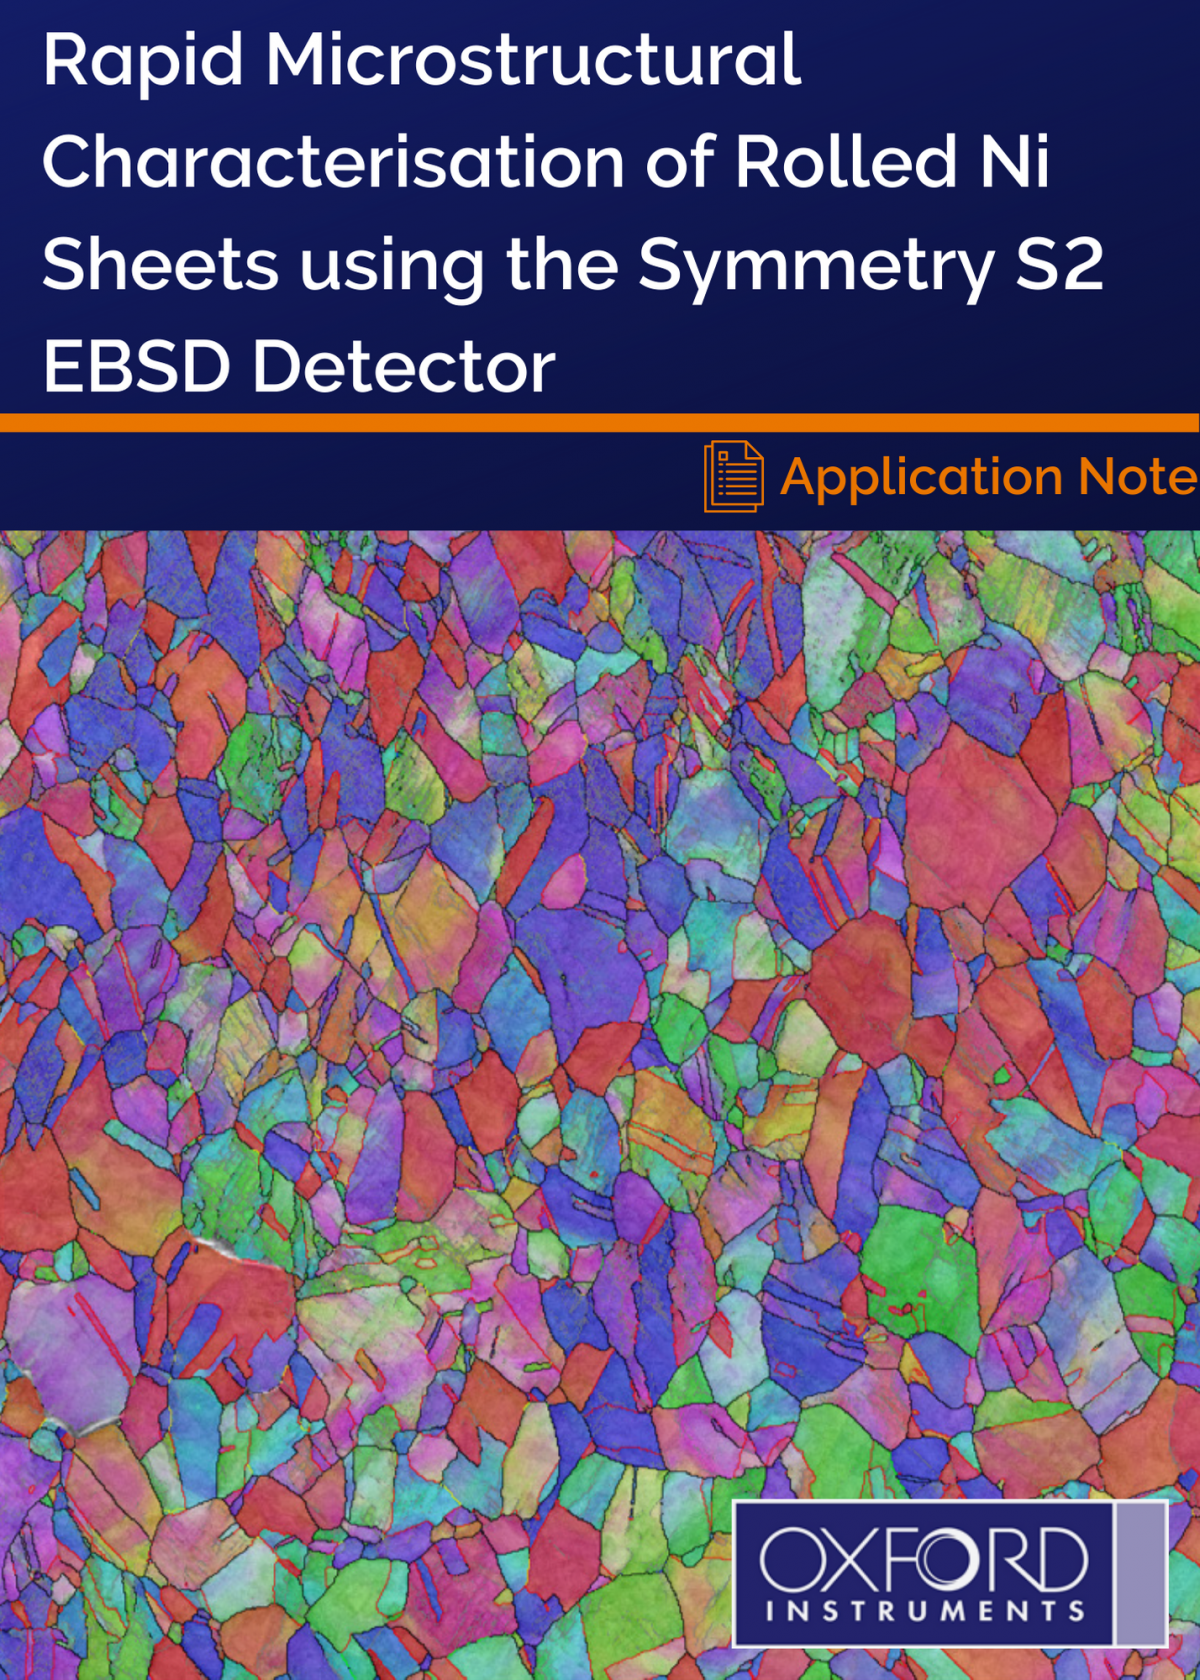 Rapid Microstructural Characterisation of Rolled Ni Sheets using the Symmetry S2 EBSD Detector